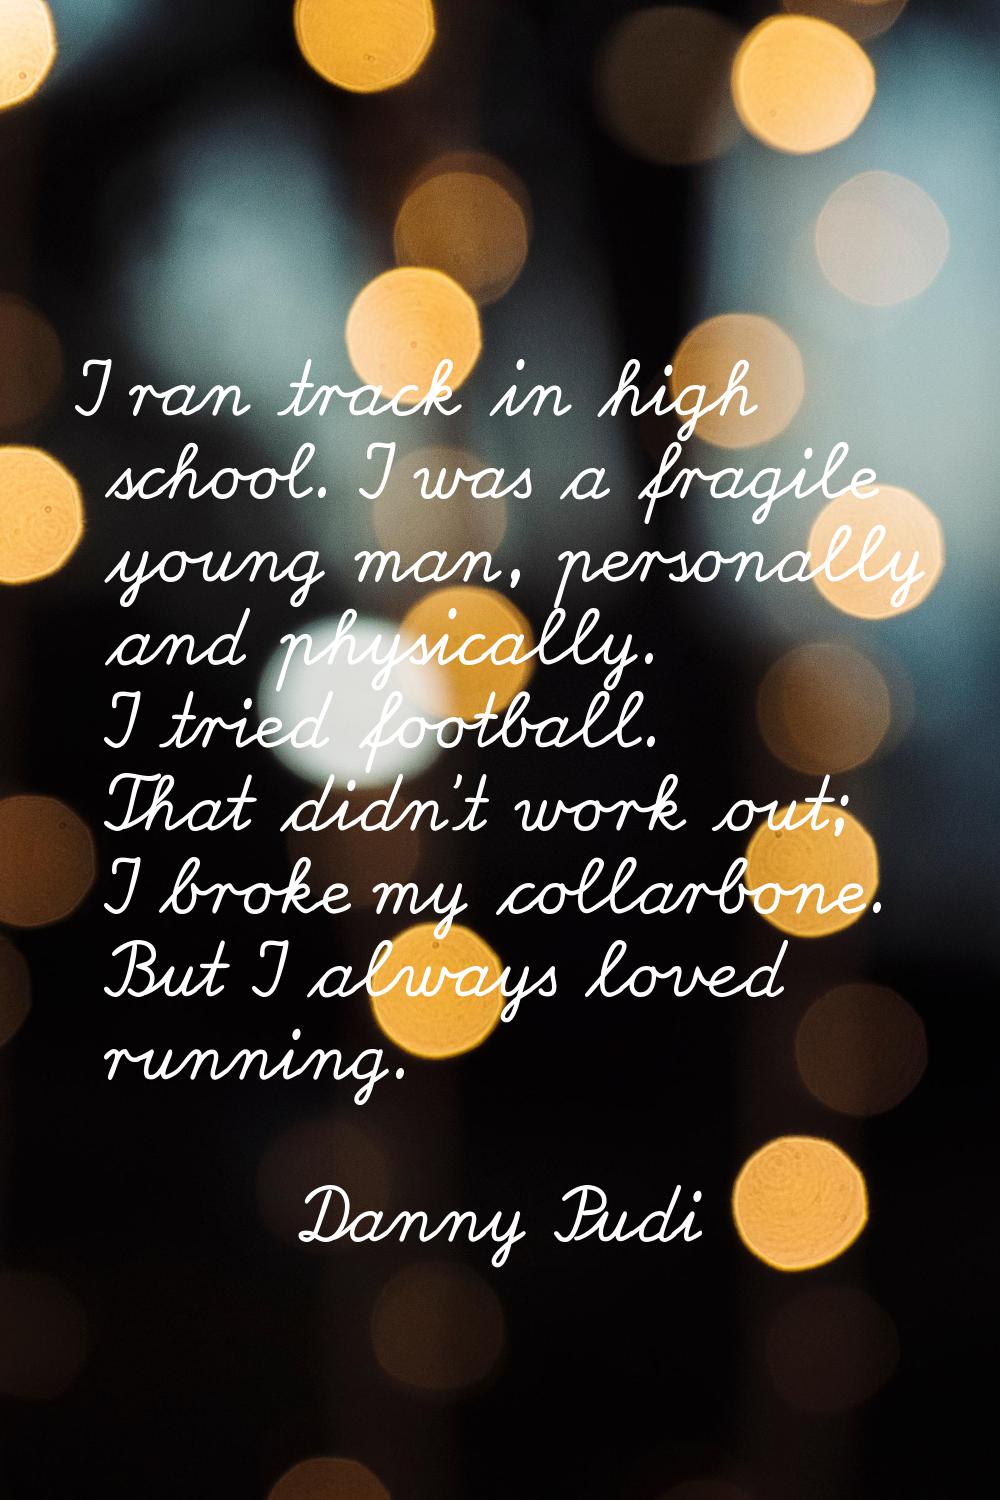 I ran track in high school. I was a fragile young man, personally and physically. I tried football.